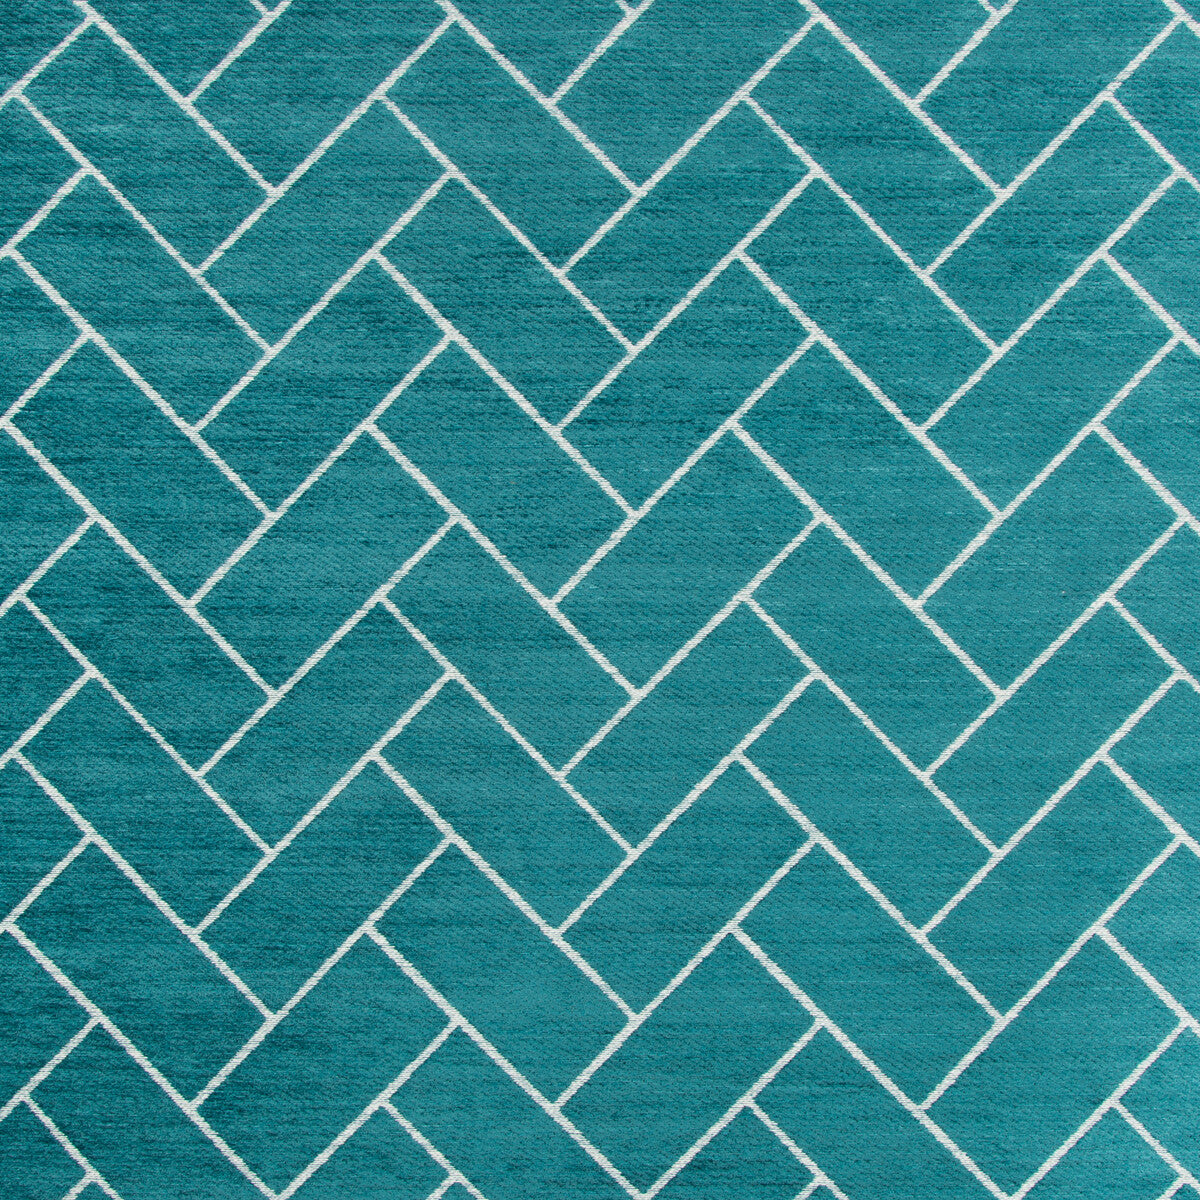 Kravet Design fabric in 34975-13 color - pattern 34975.13.0 - by Kravet Design in the Performance Crypton Home collection